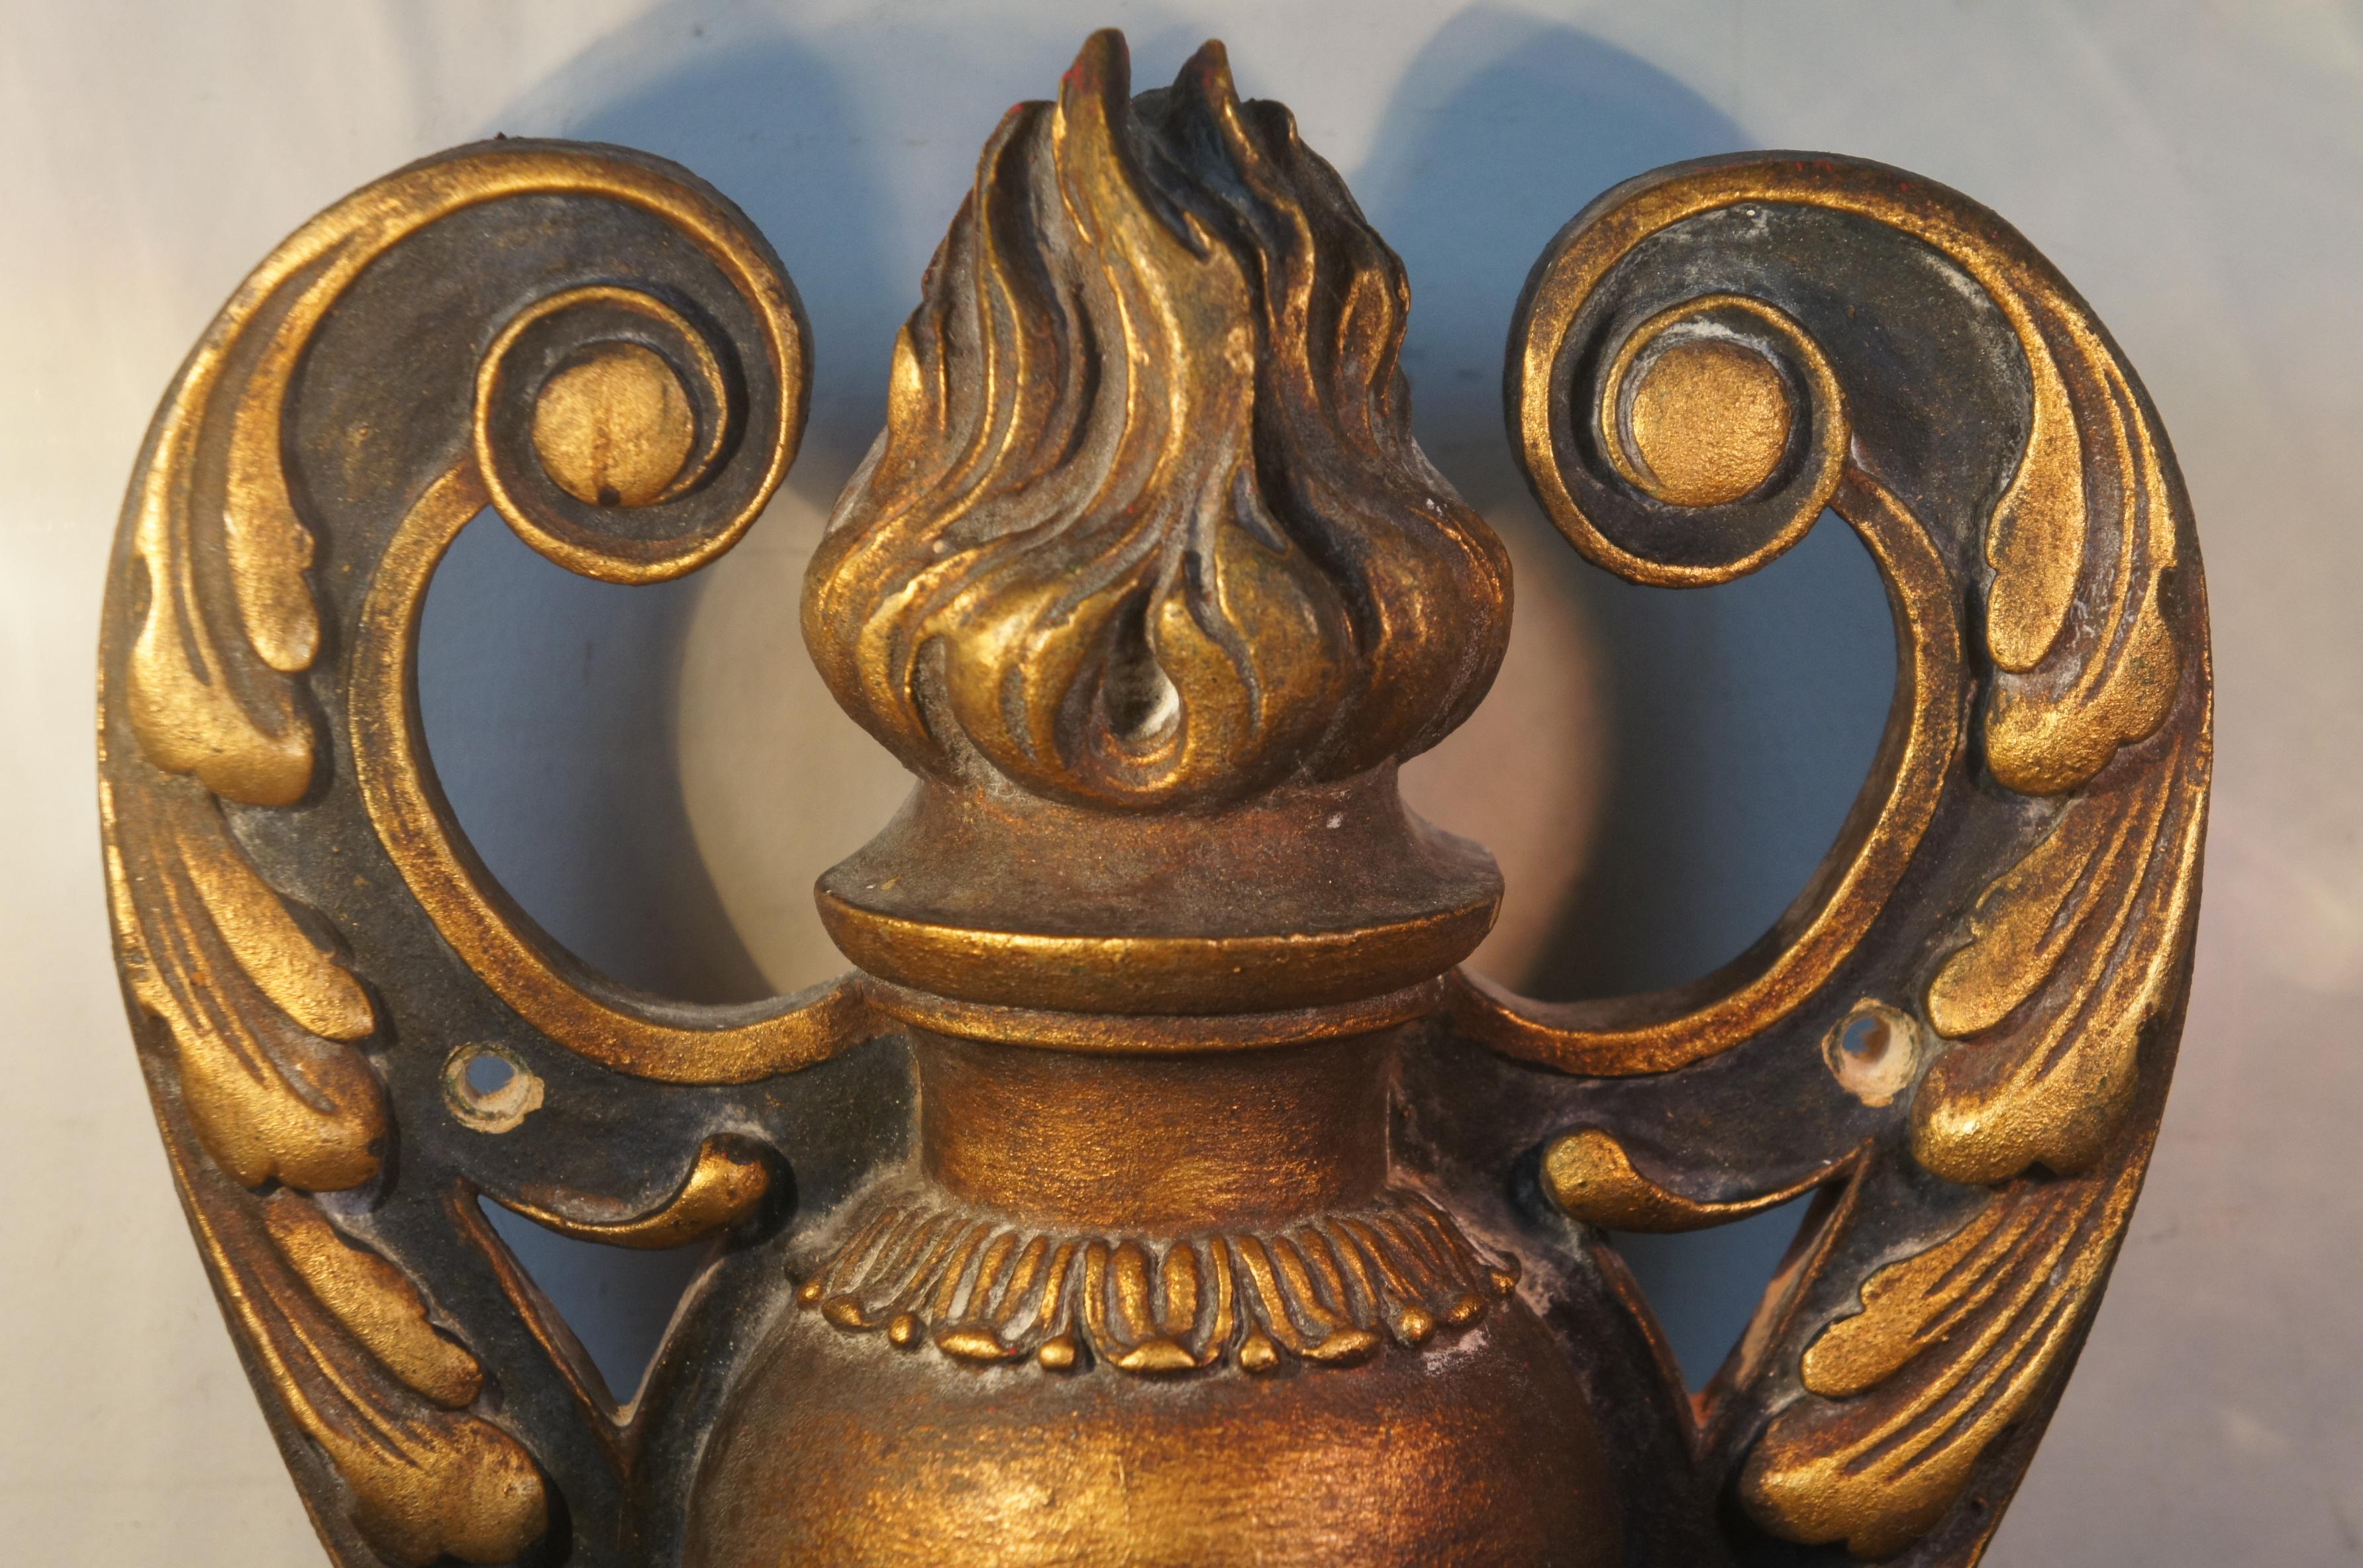 2 Antique Baroque Revival Neoclassical Carved Two Light Candelabra Wall Sconces For Sale 5